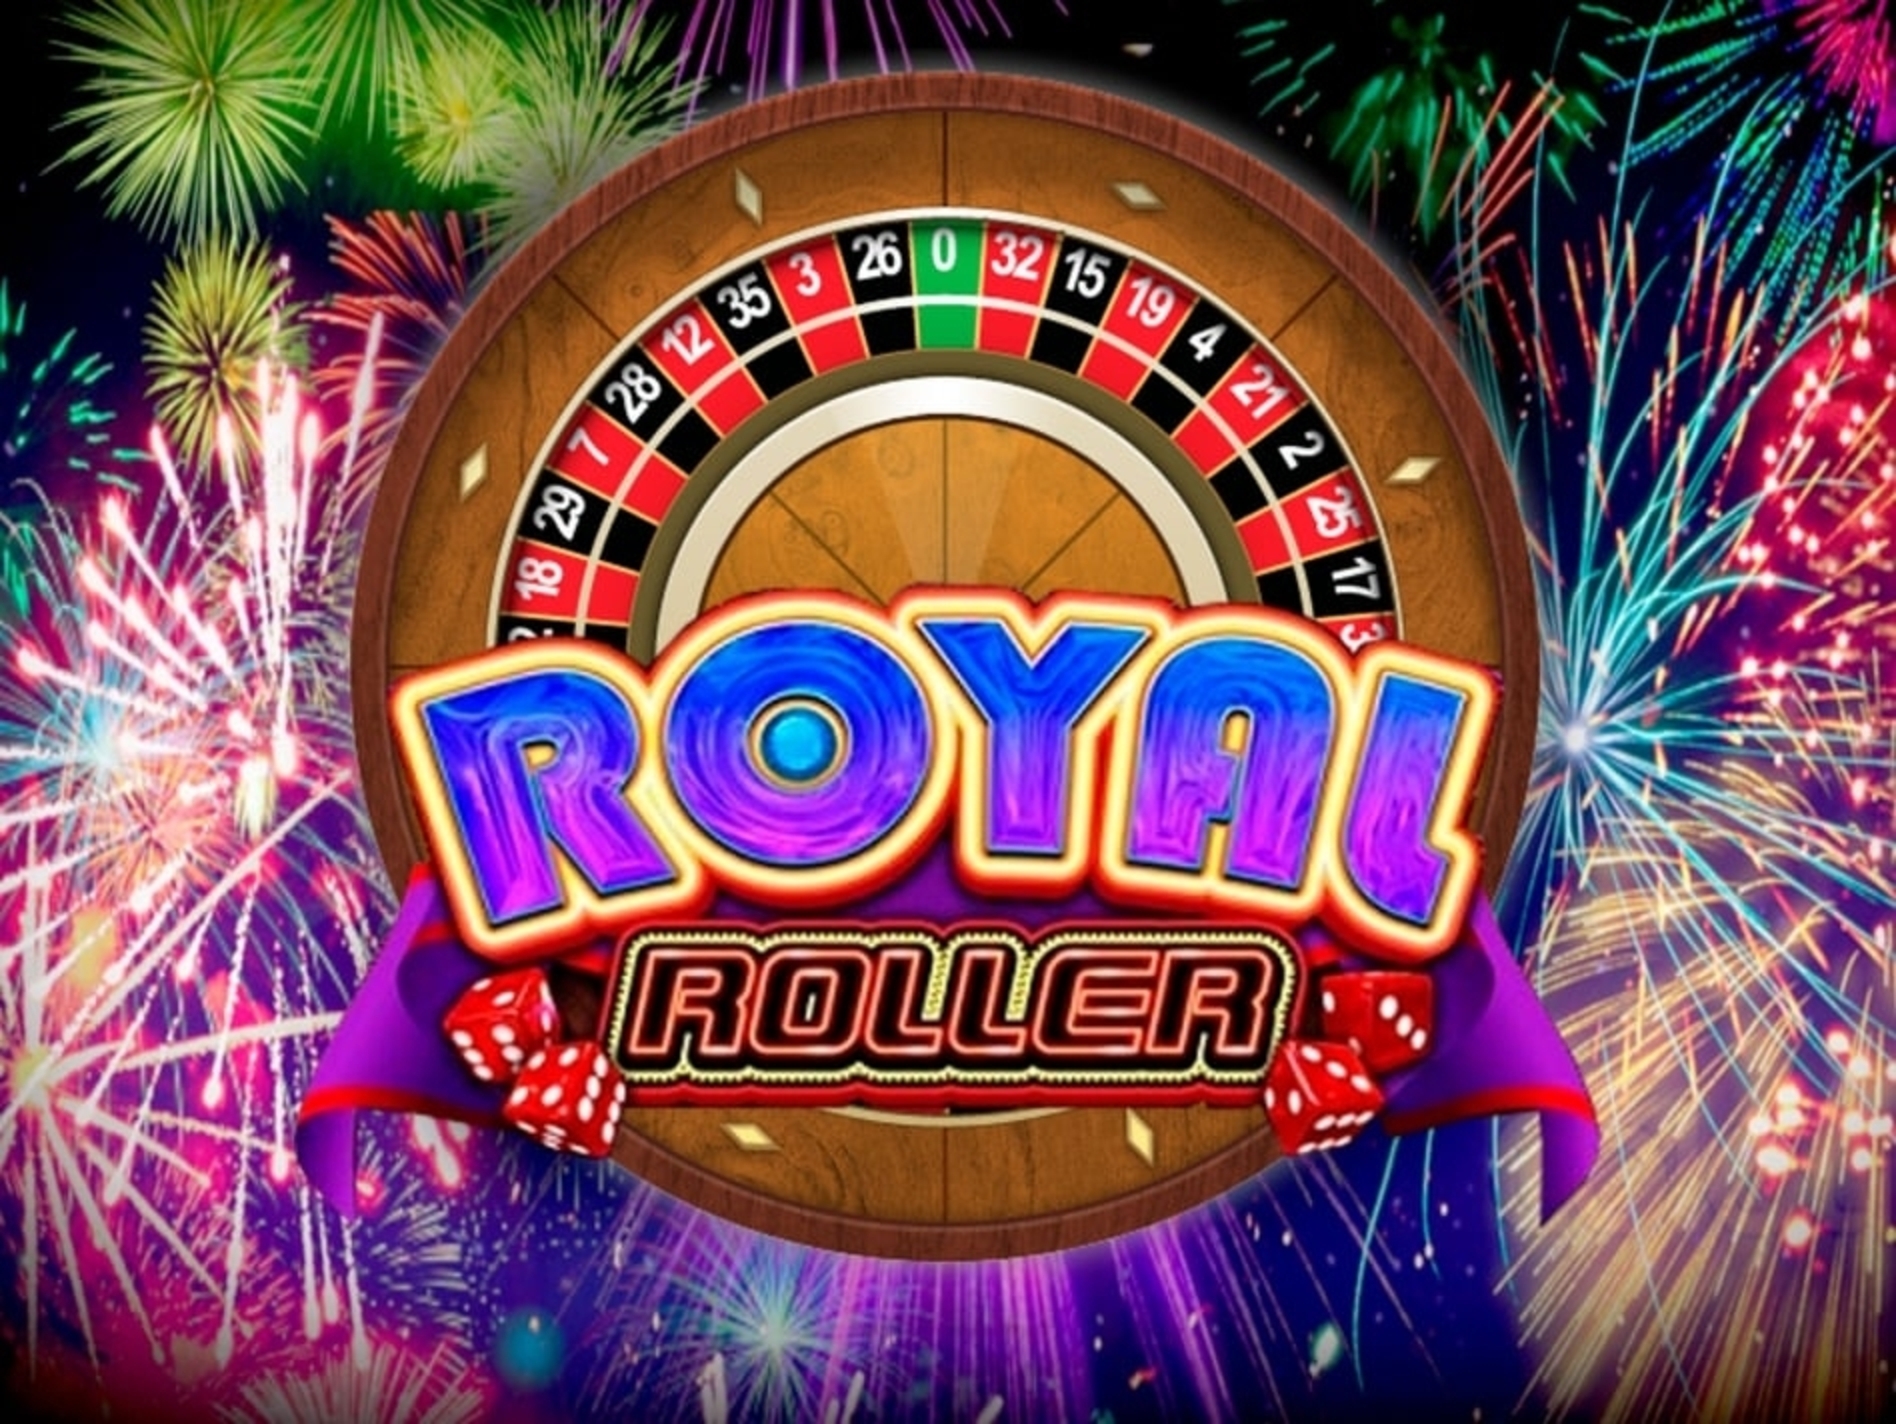 The Royal Roller Online Slot Demo Game by Microgaming